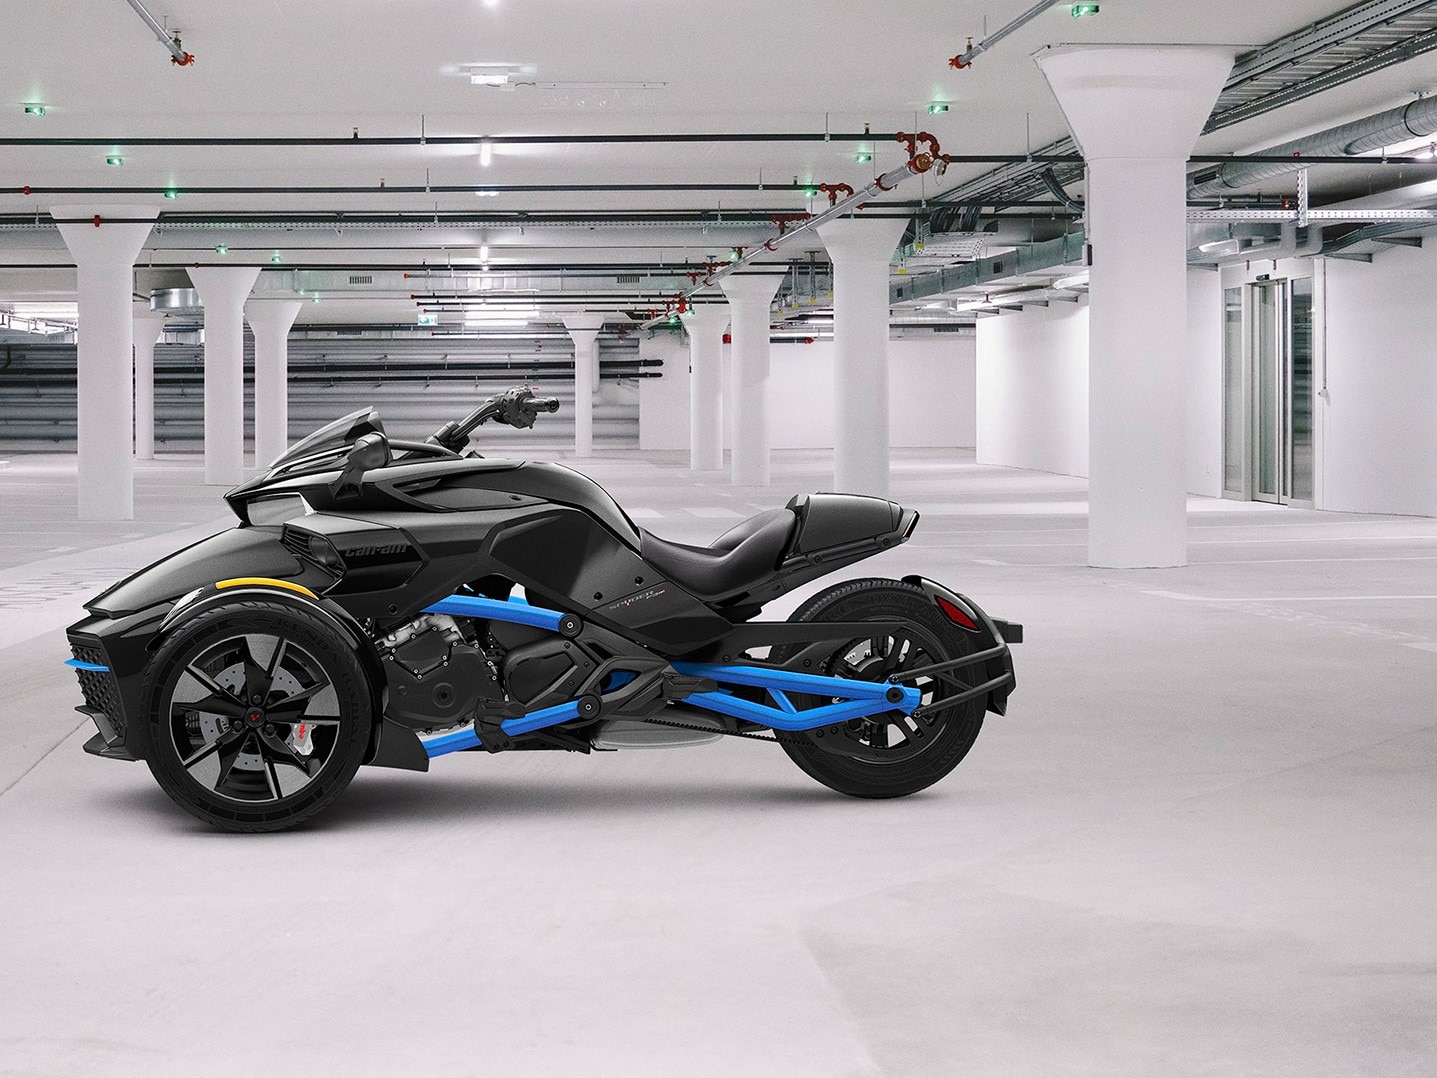 The indispensable things at the dealership for three-wheeled vehicles